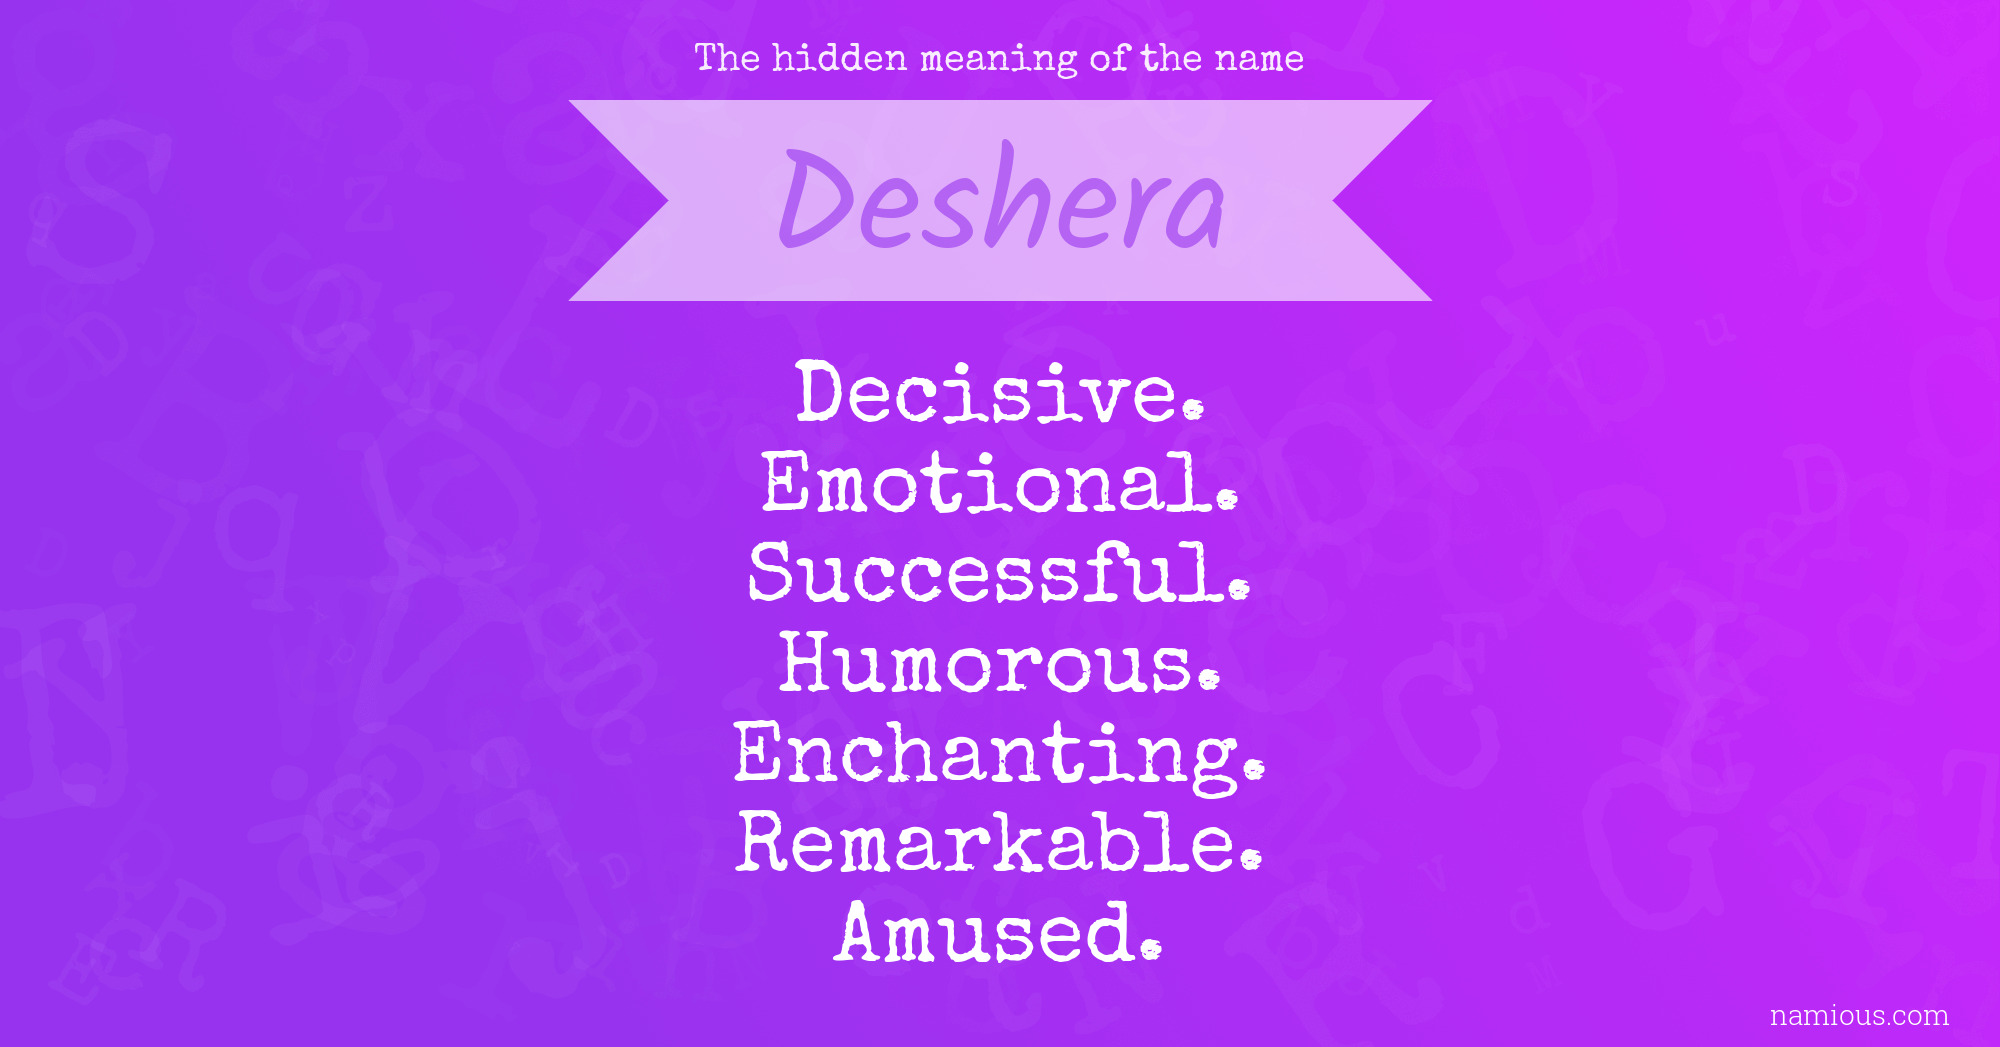 The hidden meaning of the name Deshera